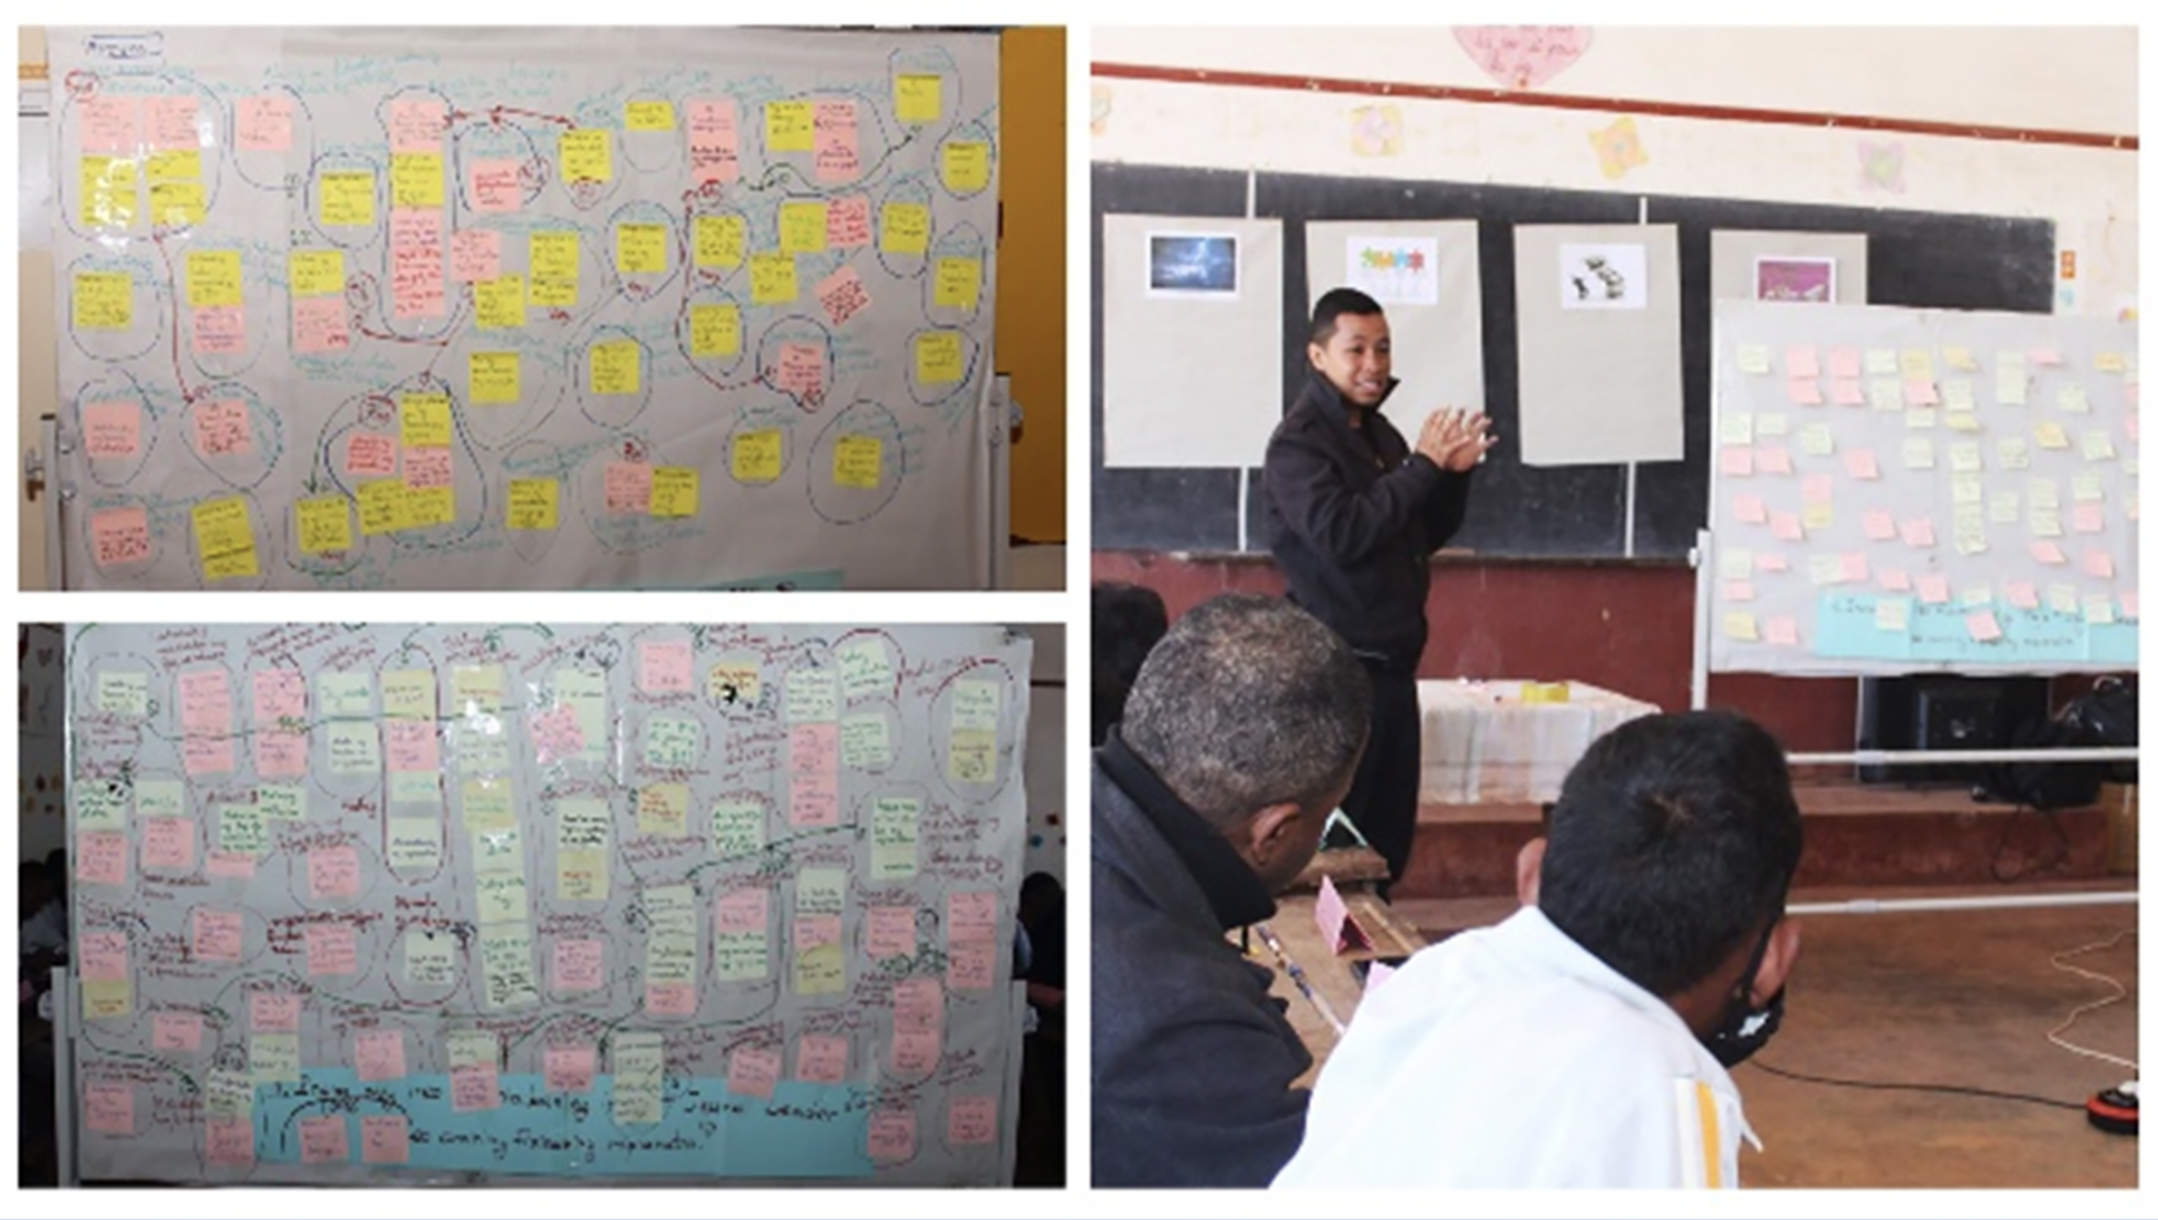 Exploring the multi-level impacts of a youth-led comprehensive sexuality education model in Madagascar using Human-centered Design methods